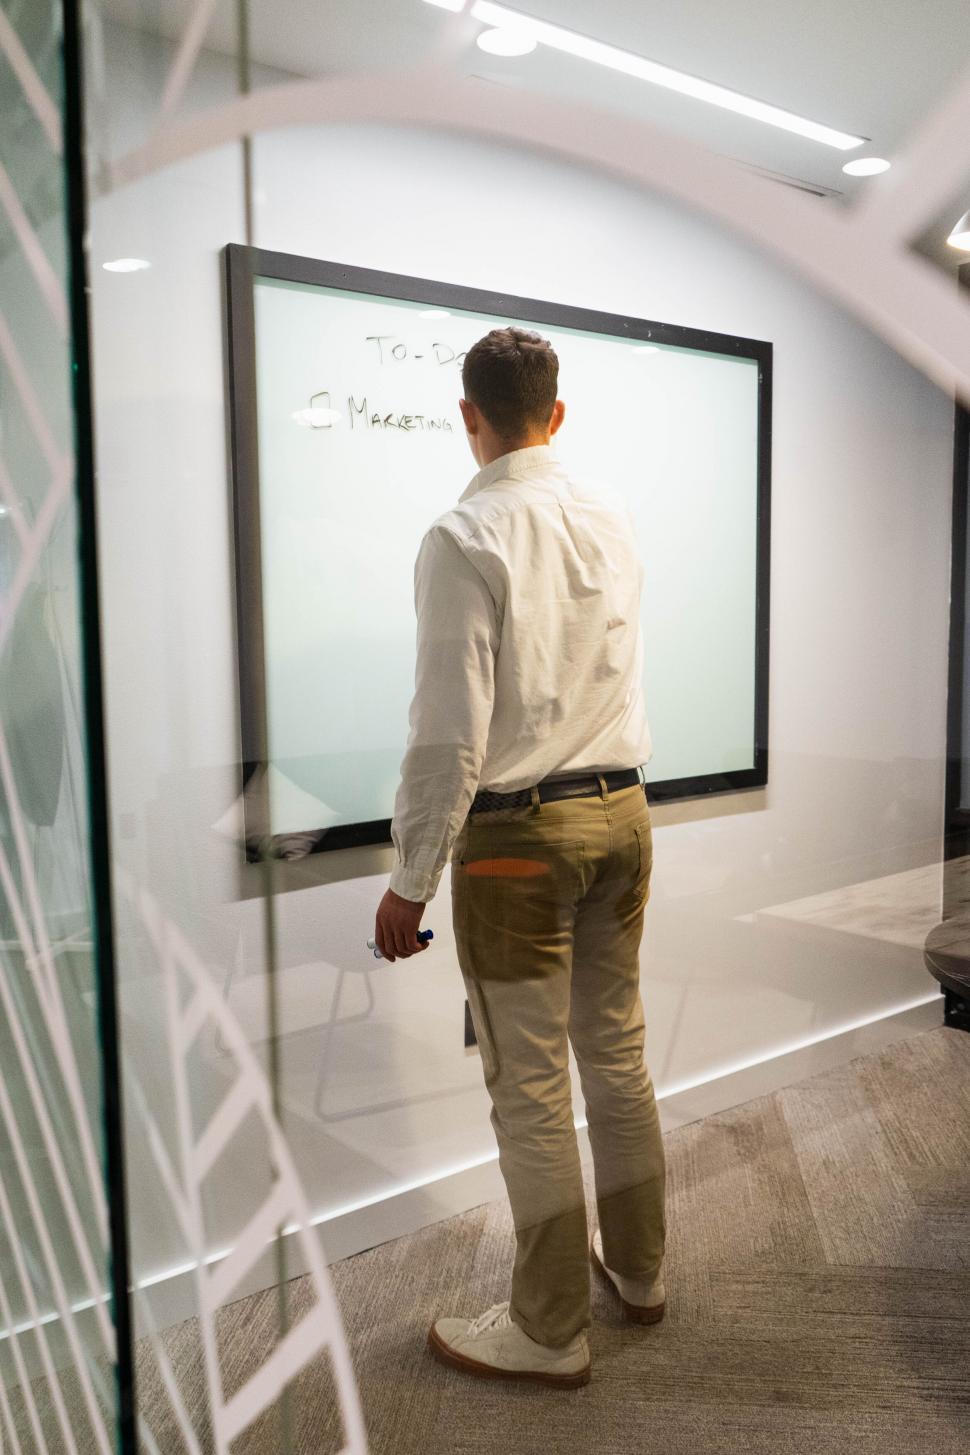 Free Image of Man writing on whiteboard in office 